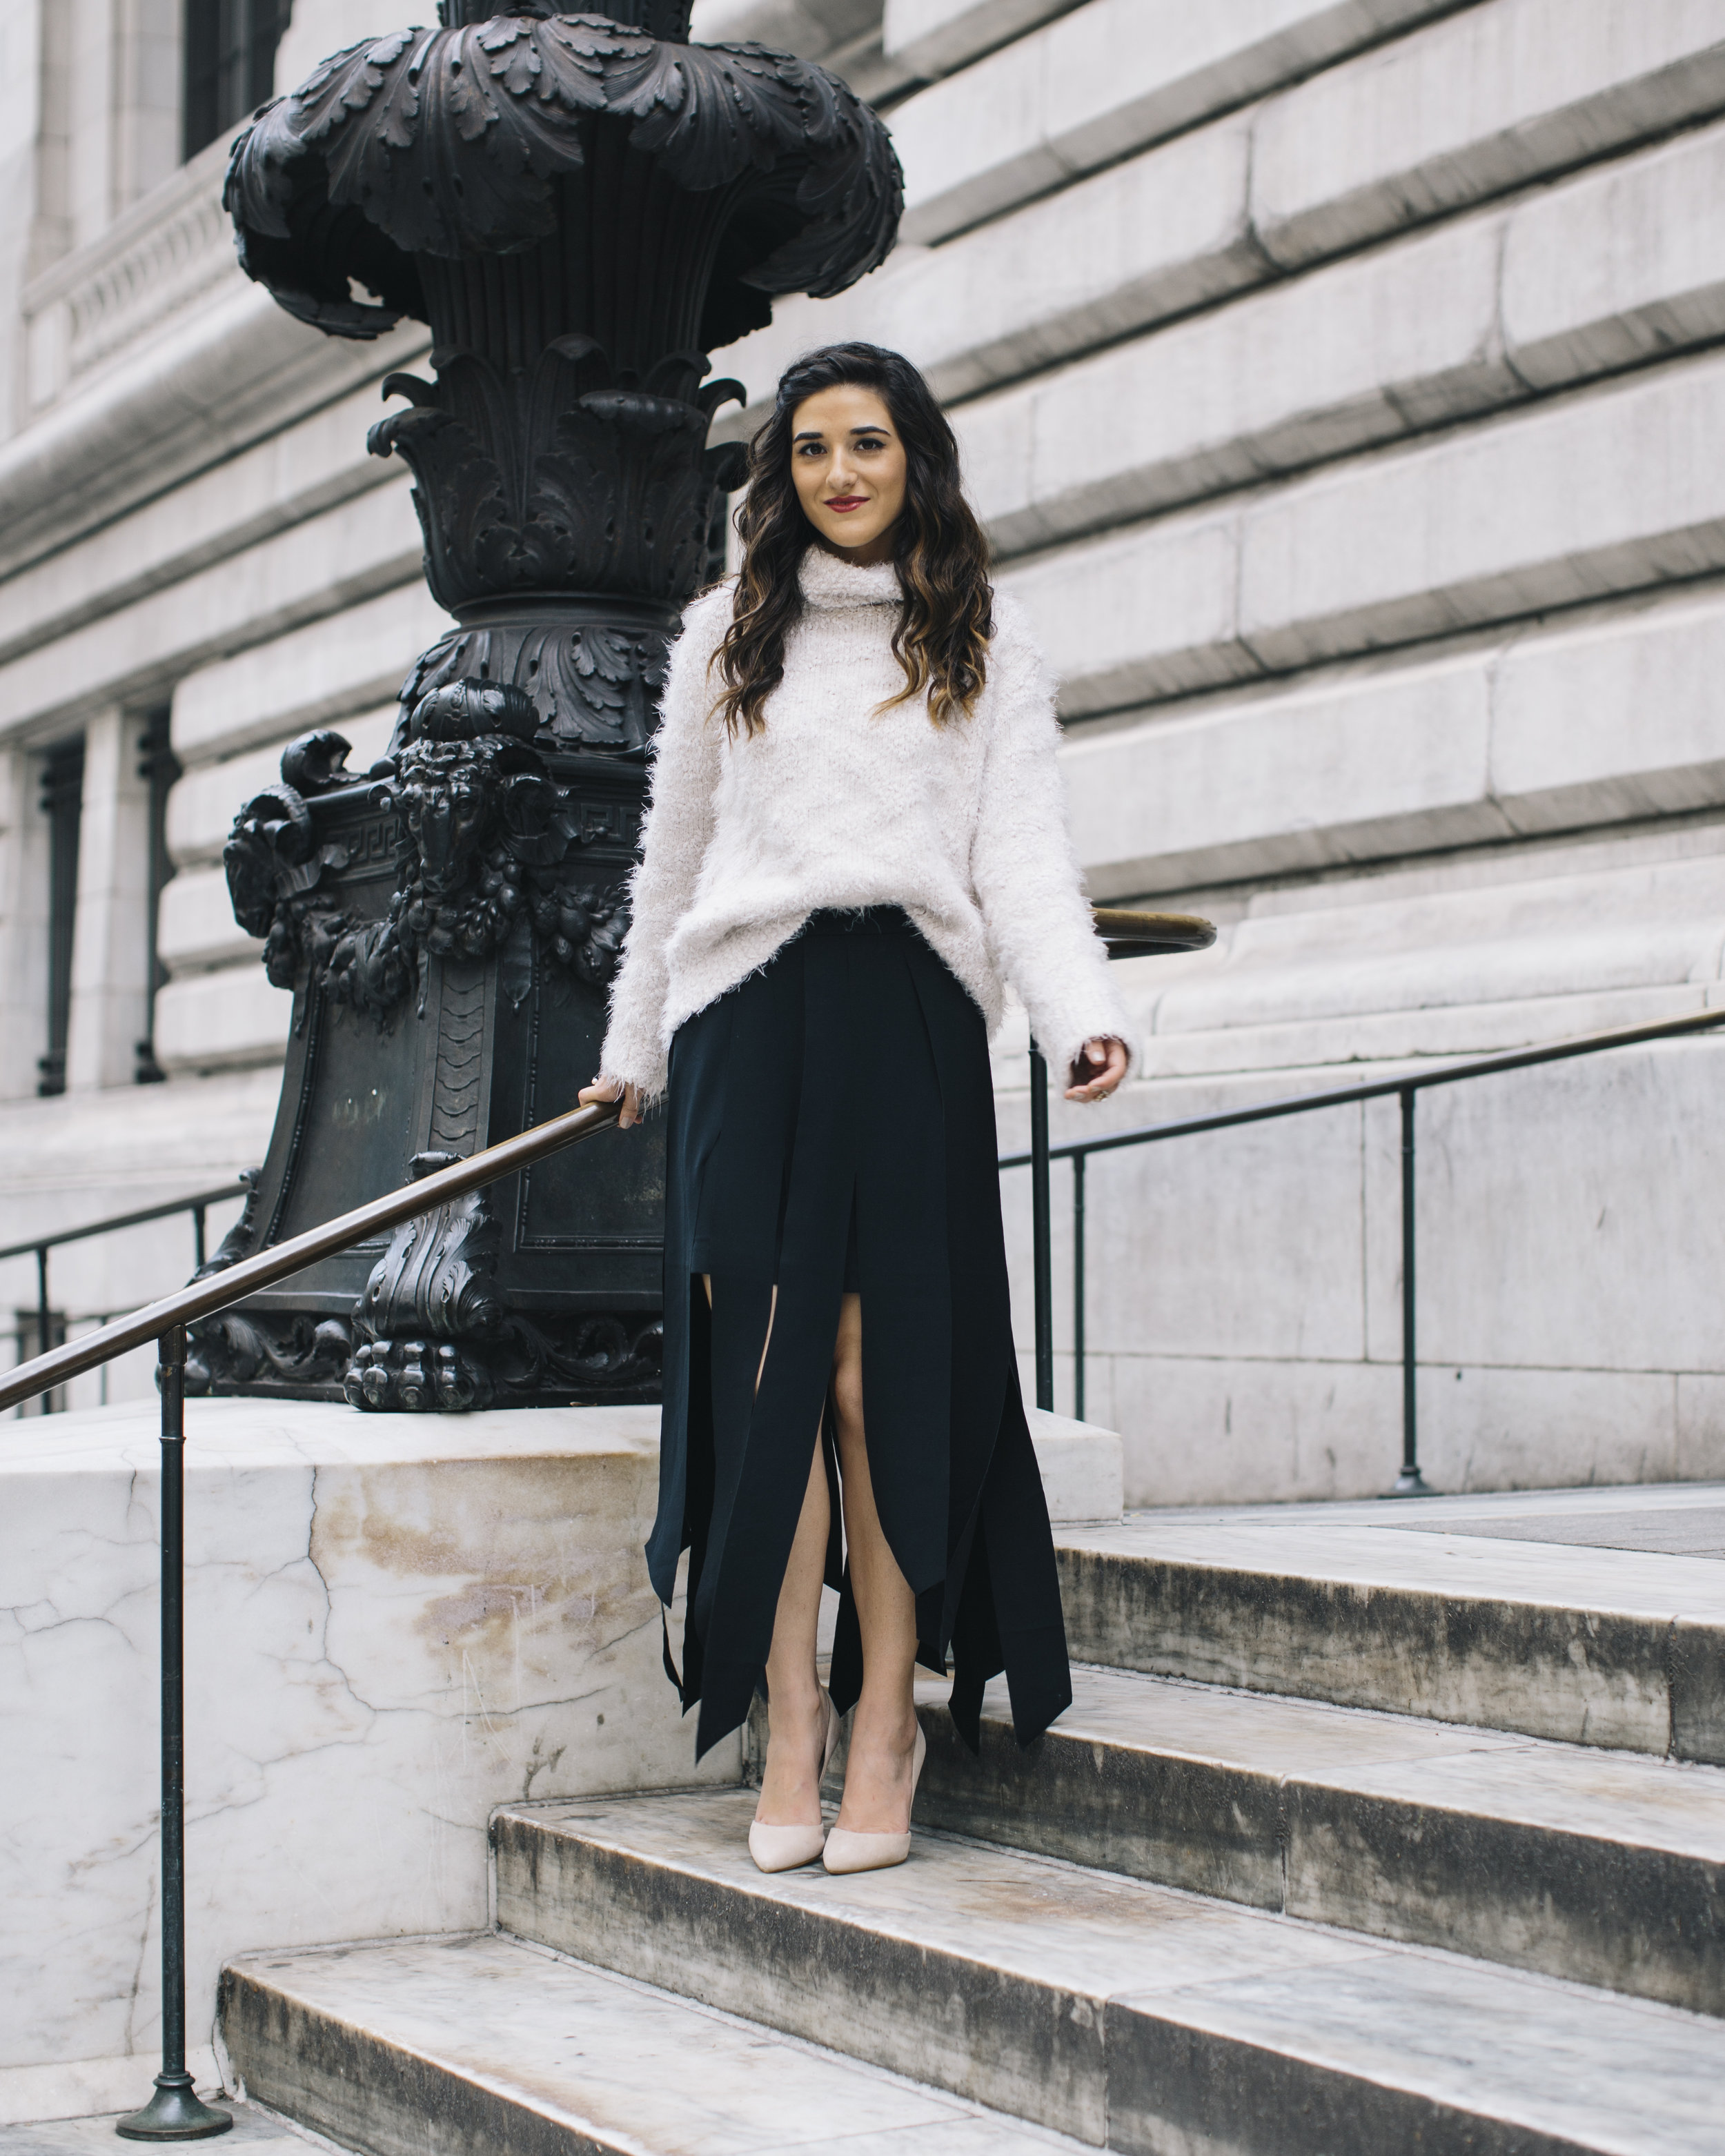 Shopping with Octer Fringe Skirt Louboutins & Love Fashion Blog Esther Santer NYC Street Style Blogger Outfit OOTD Buy Trendy Sweater Cozy Zara Steve Madden Nude Heels Neutral Colors Navy White Winter Beautiful Photoshoot New York City Hair Girl Women.jpg